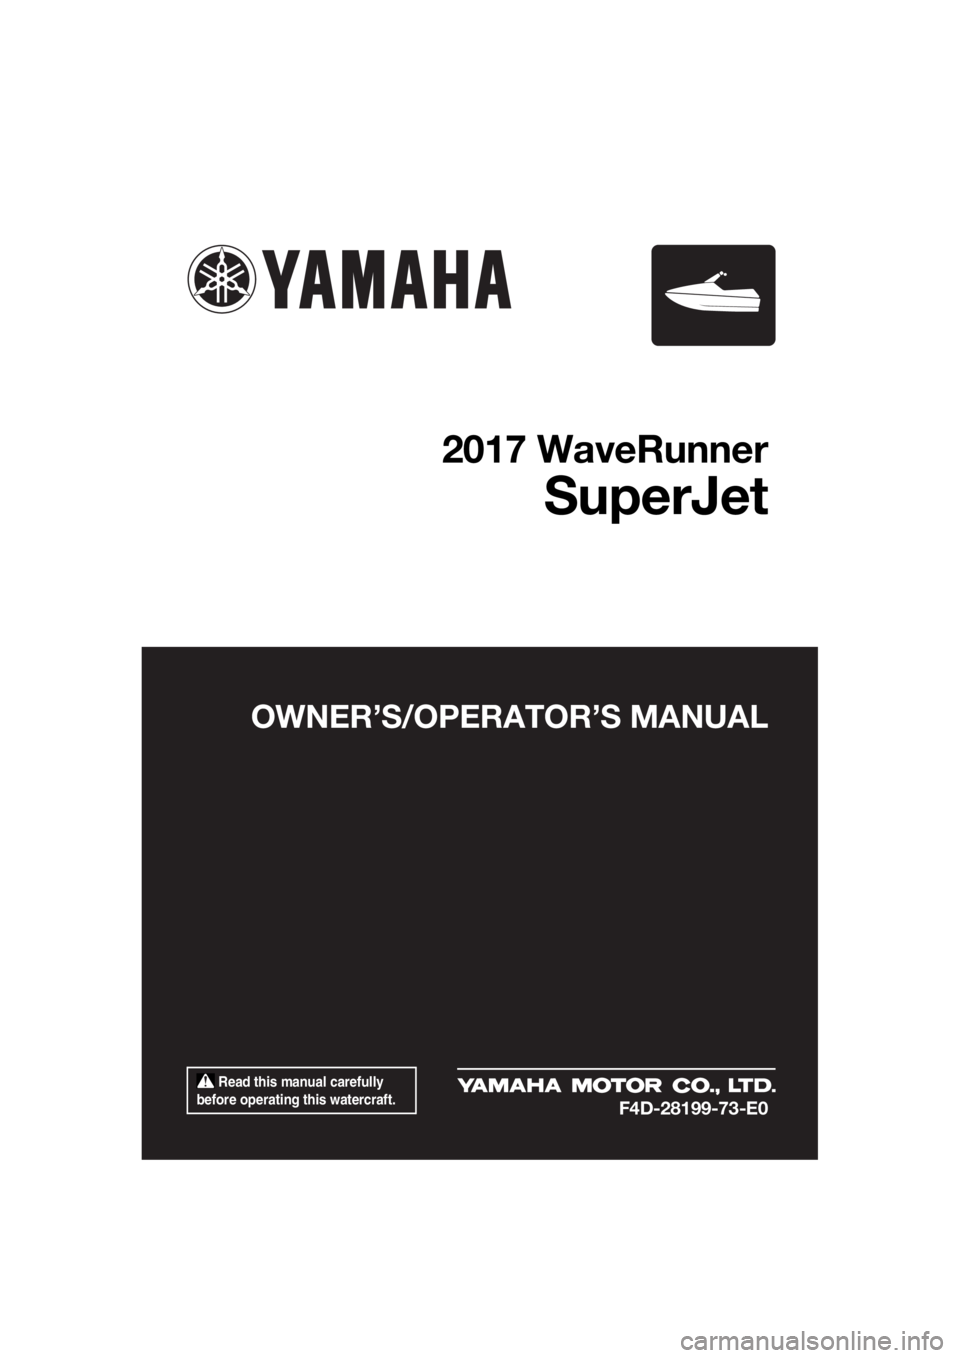 YAMAHA SUPERJET 2017  Owners Manual  Read this manual carefully 
before operating this watercraft.
OWNER’S/OPERATOR’S MANUAL
2017 WaveRunner
SuperJet
F4D-28199-73-E0
UF4D73E0.book  Page 1  Wednesday, March 23, 2016  11:40 AM 